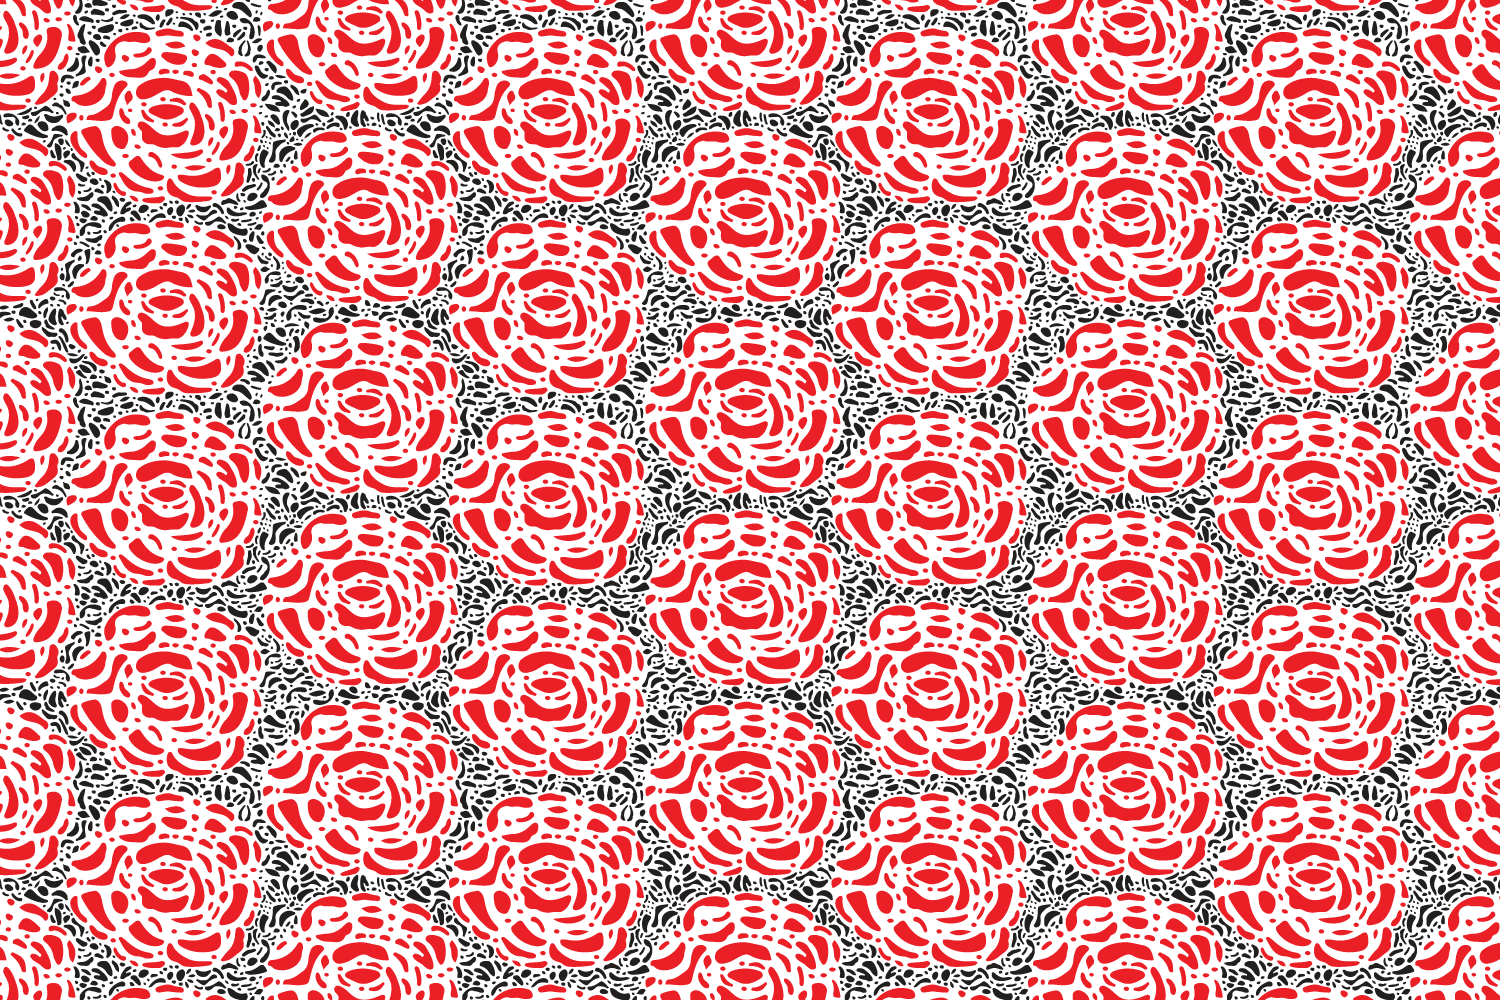 Field_of_Roses_1500px_x_1000px_02.png